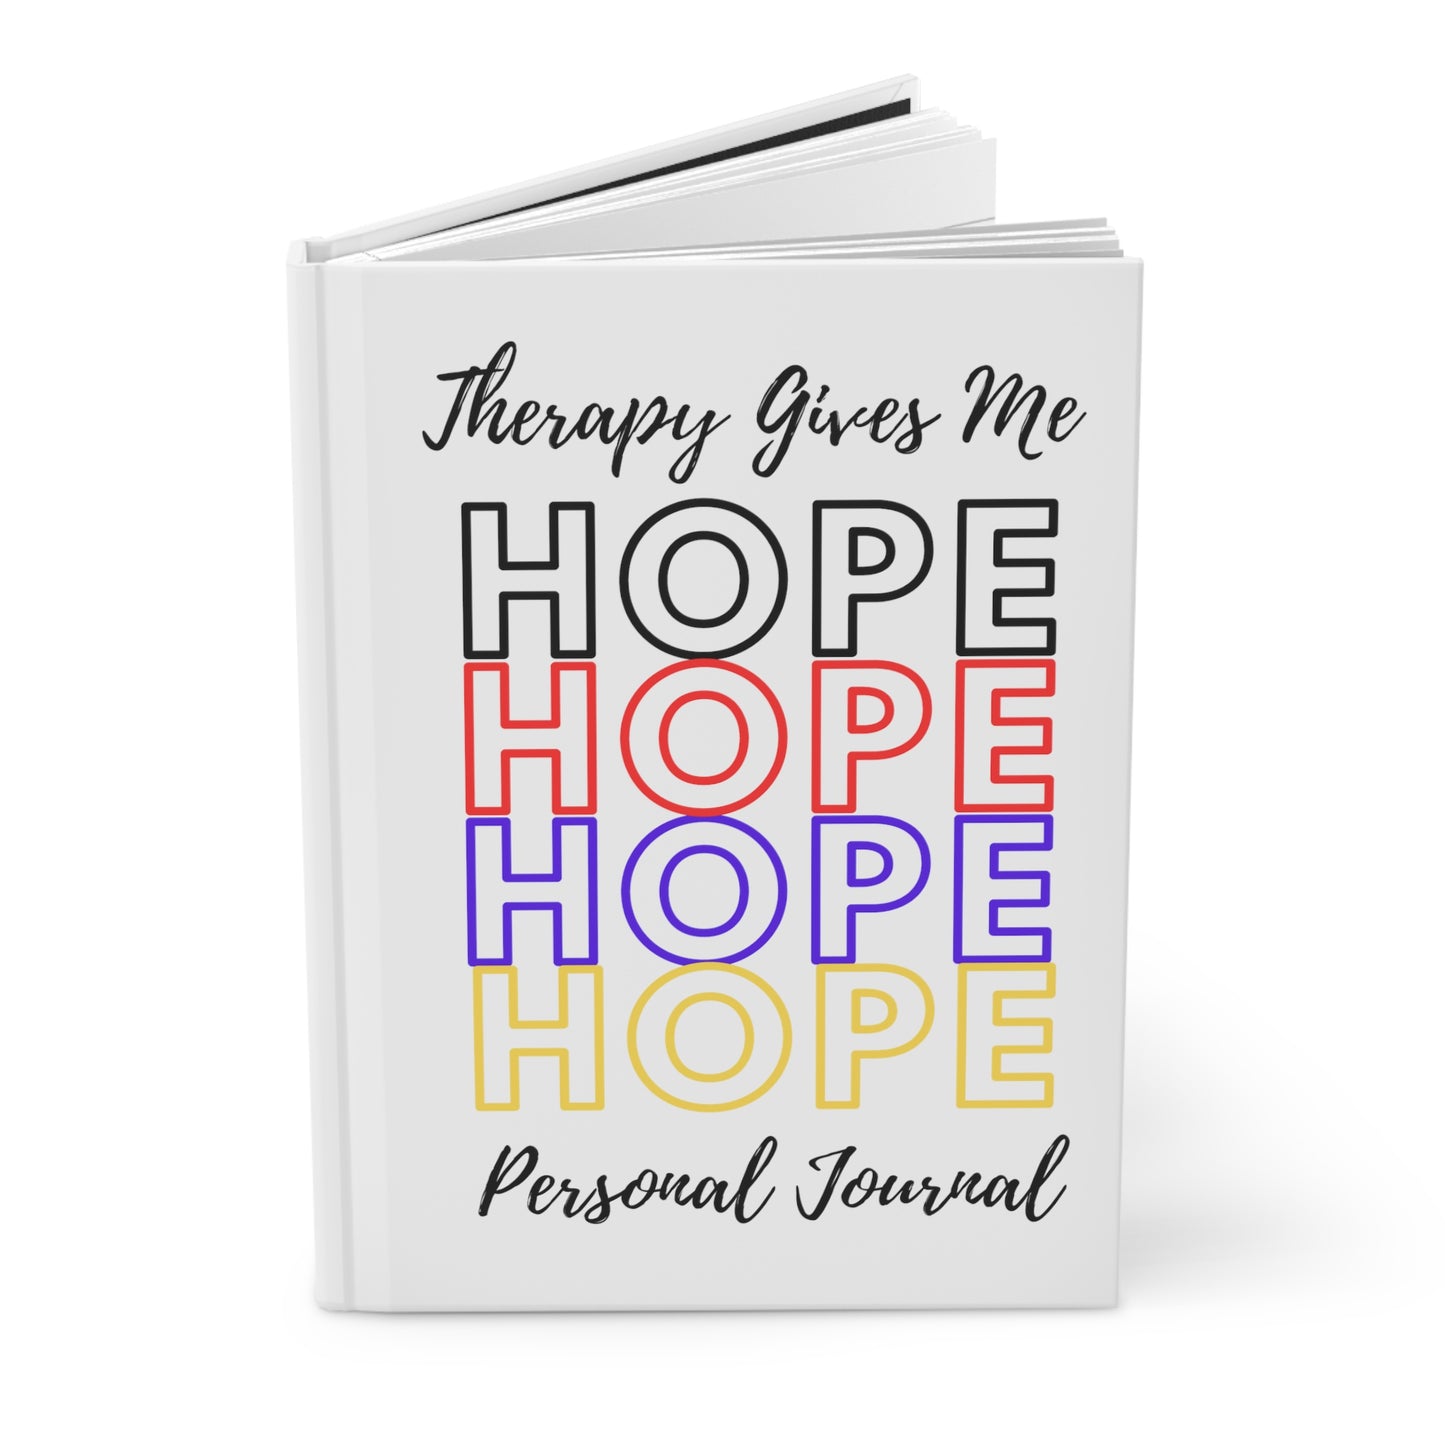 Therapy Gives Me Hope - Hardcover Journal Matte